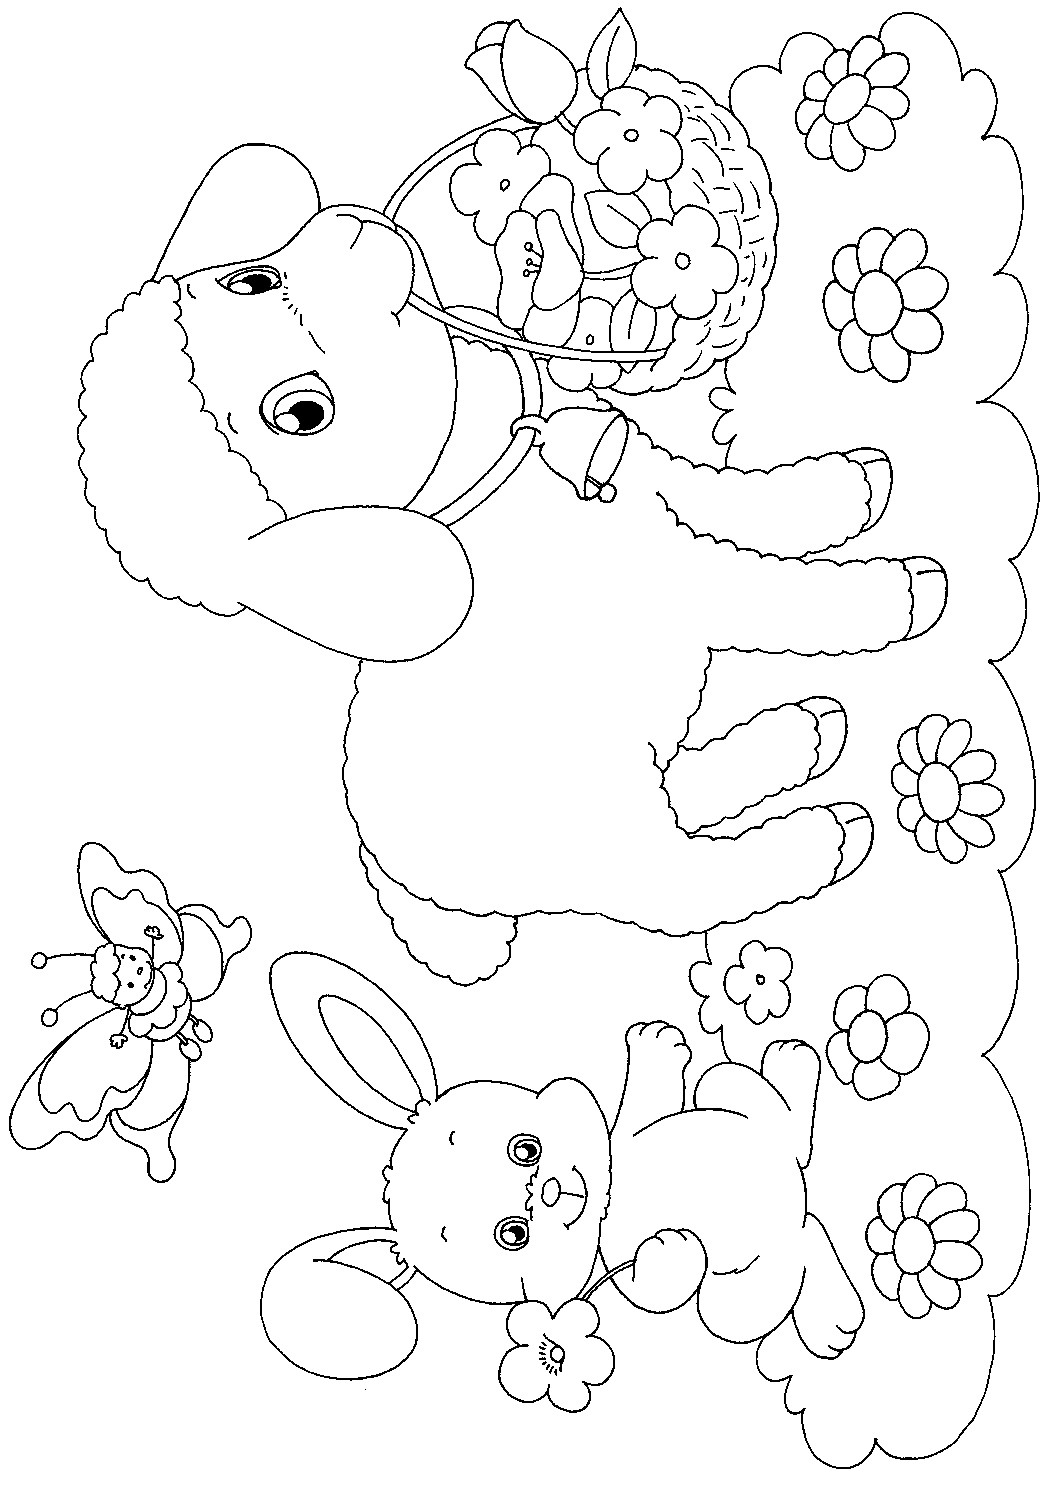 Free Spring Coloring Pages For Kids
 EASTER COLOURING EASTER PAPER CRAFT TO PRINT AND COLOUR